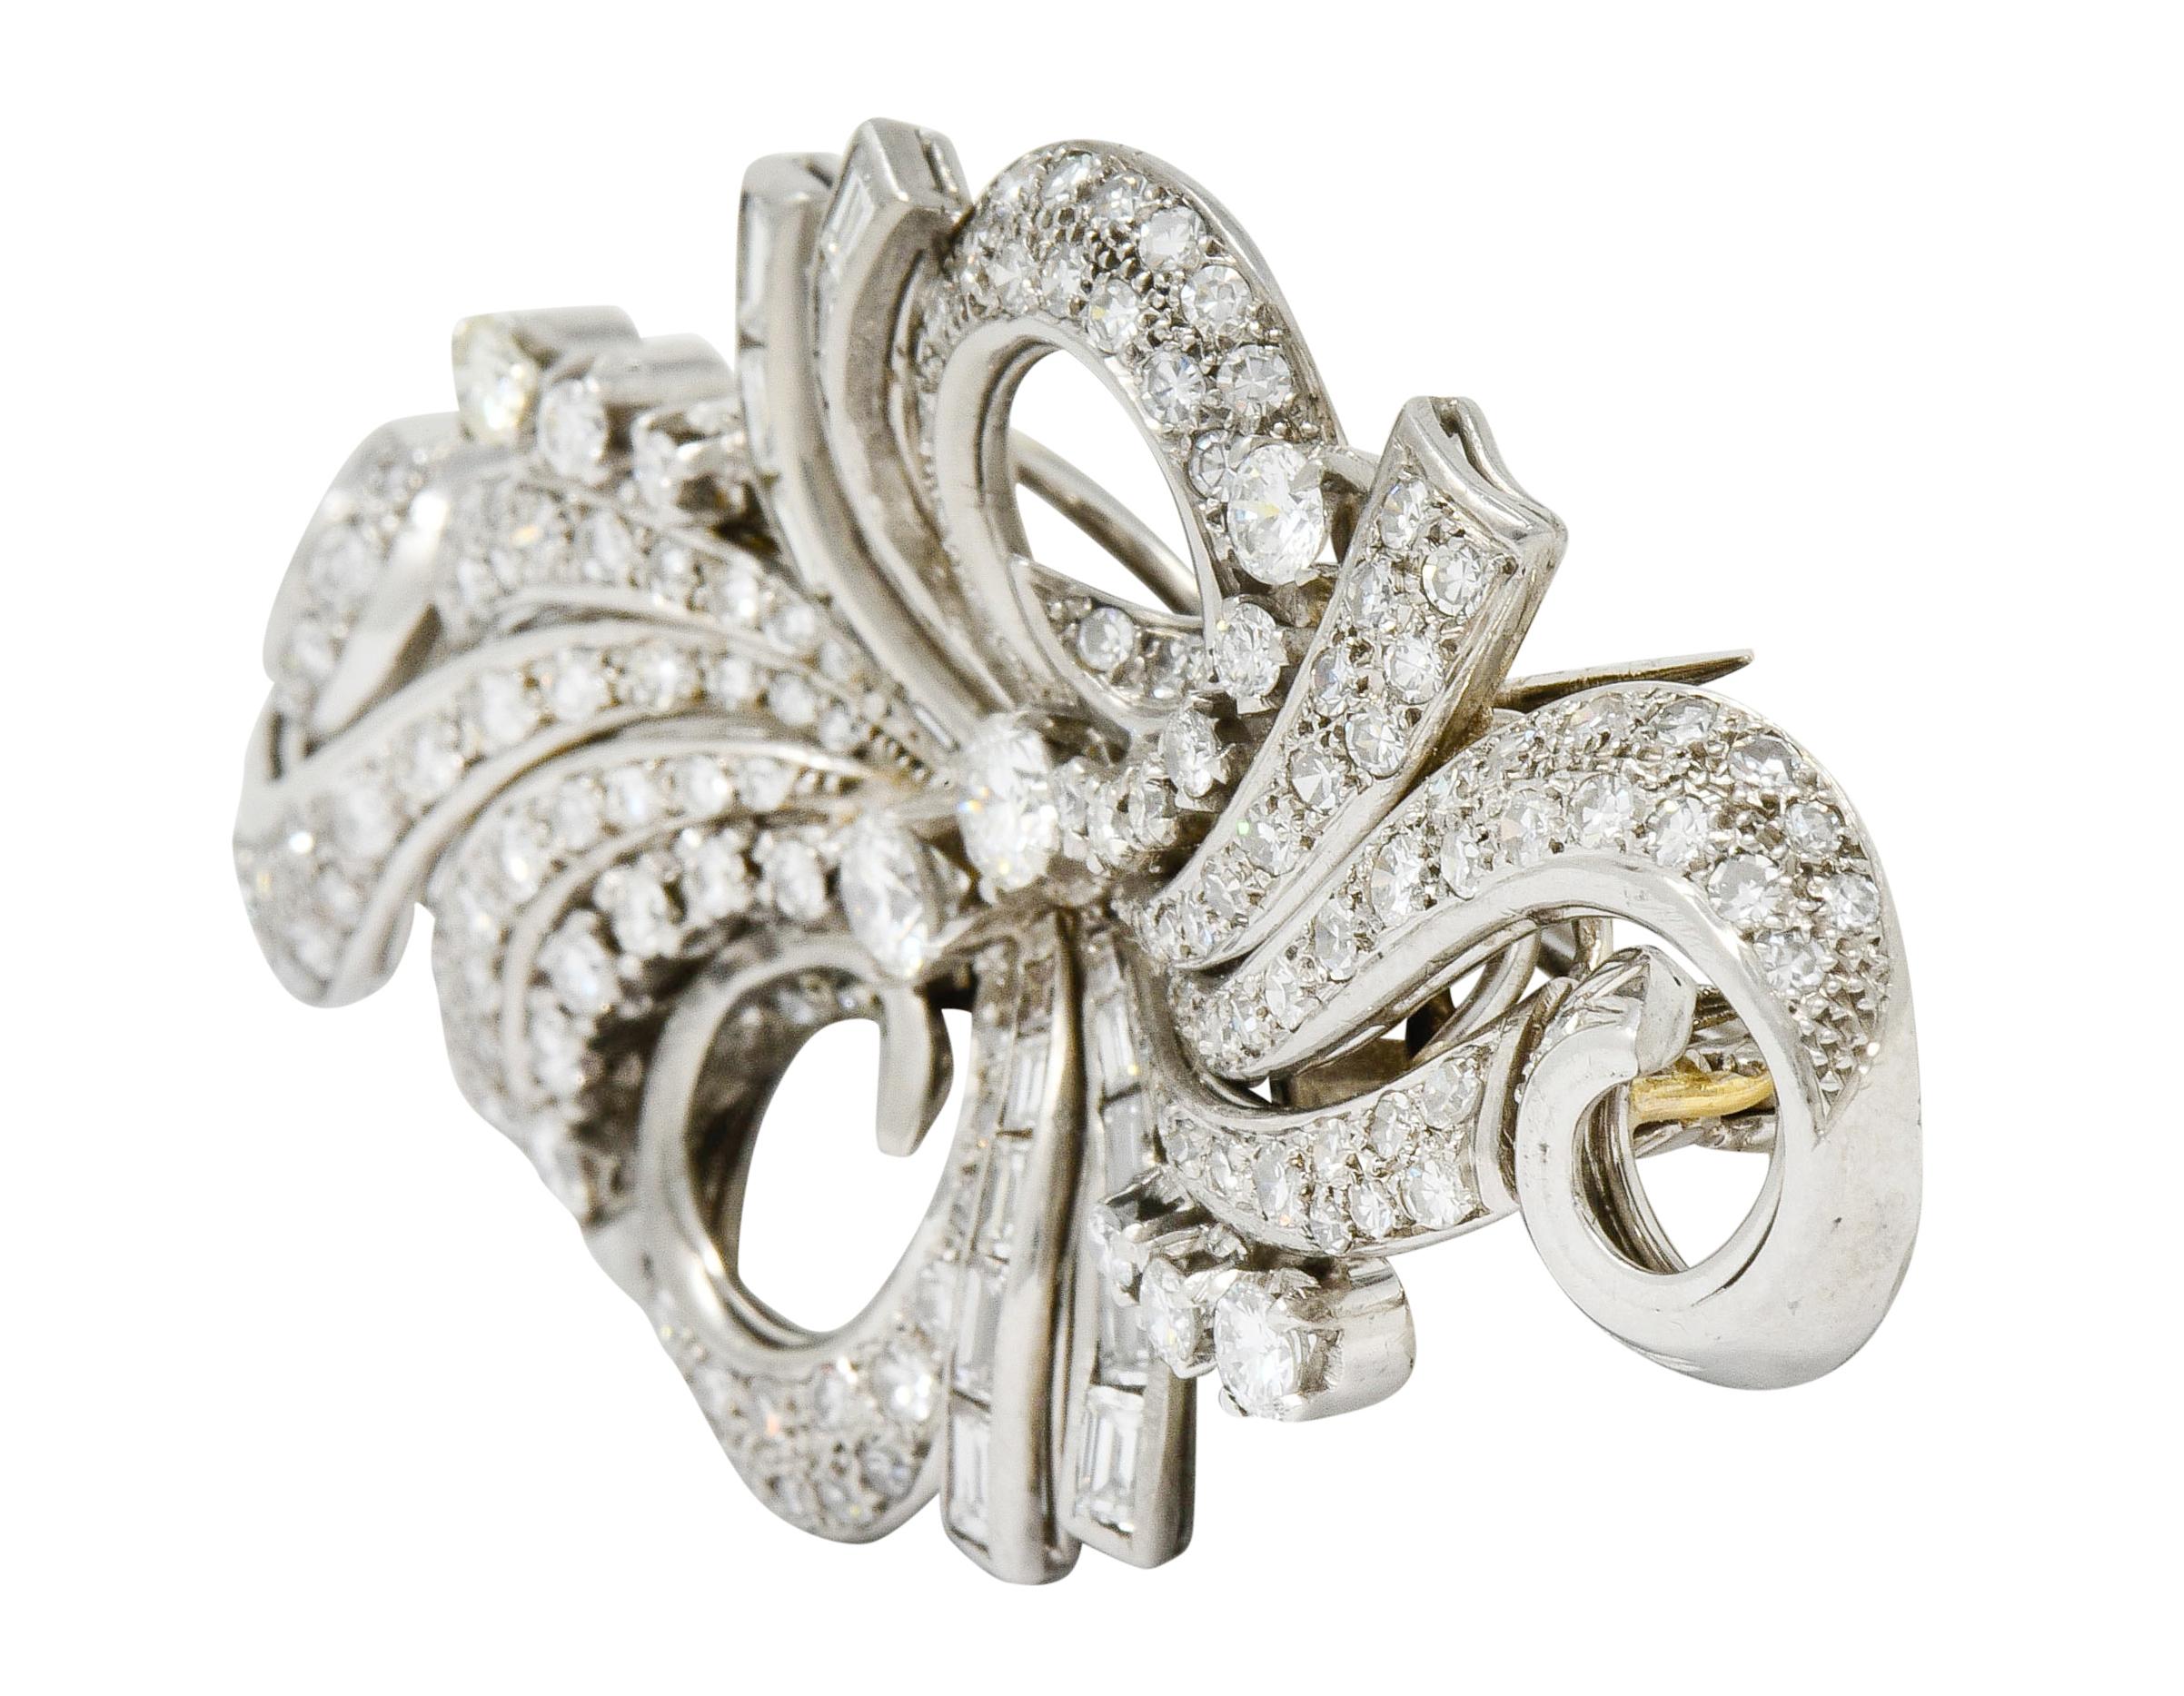 Brooch is comprised of two symmetrical scrolling ribbon motifs that can convert into two individual clips

Designed as winding ribbon-like segments that center two round brilliant cut diamonds that weigh in total 0.50 carat, J/K color with SI